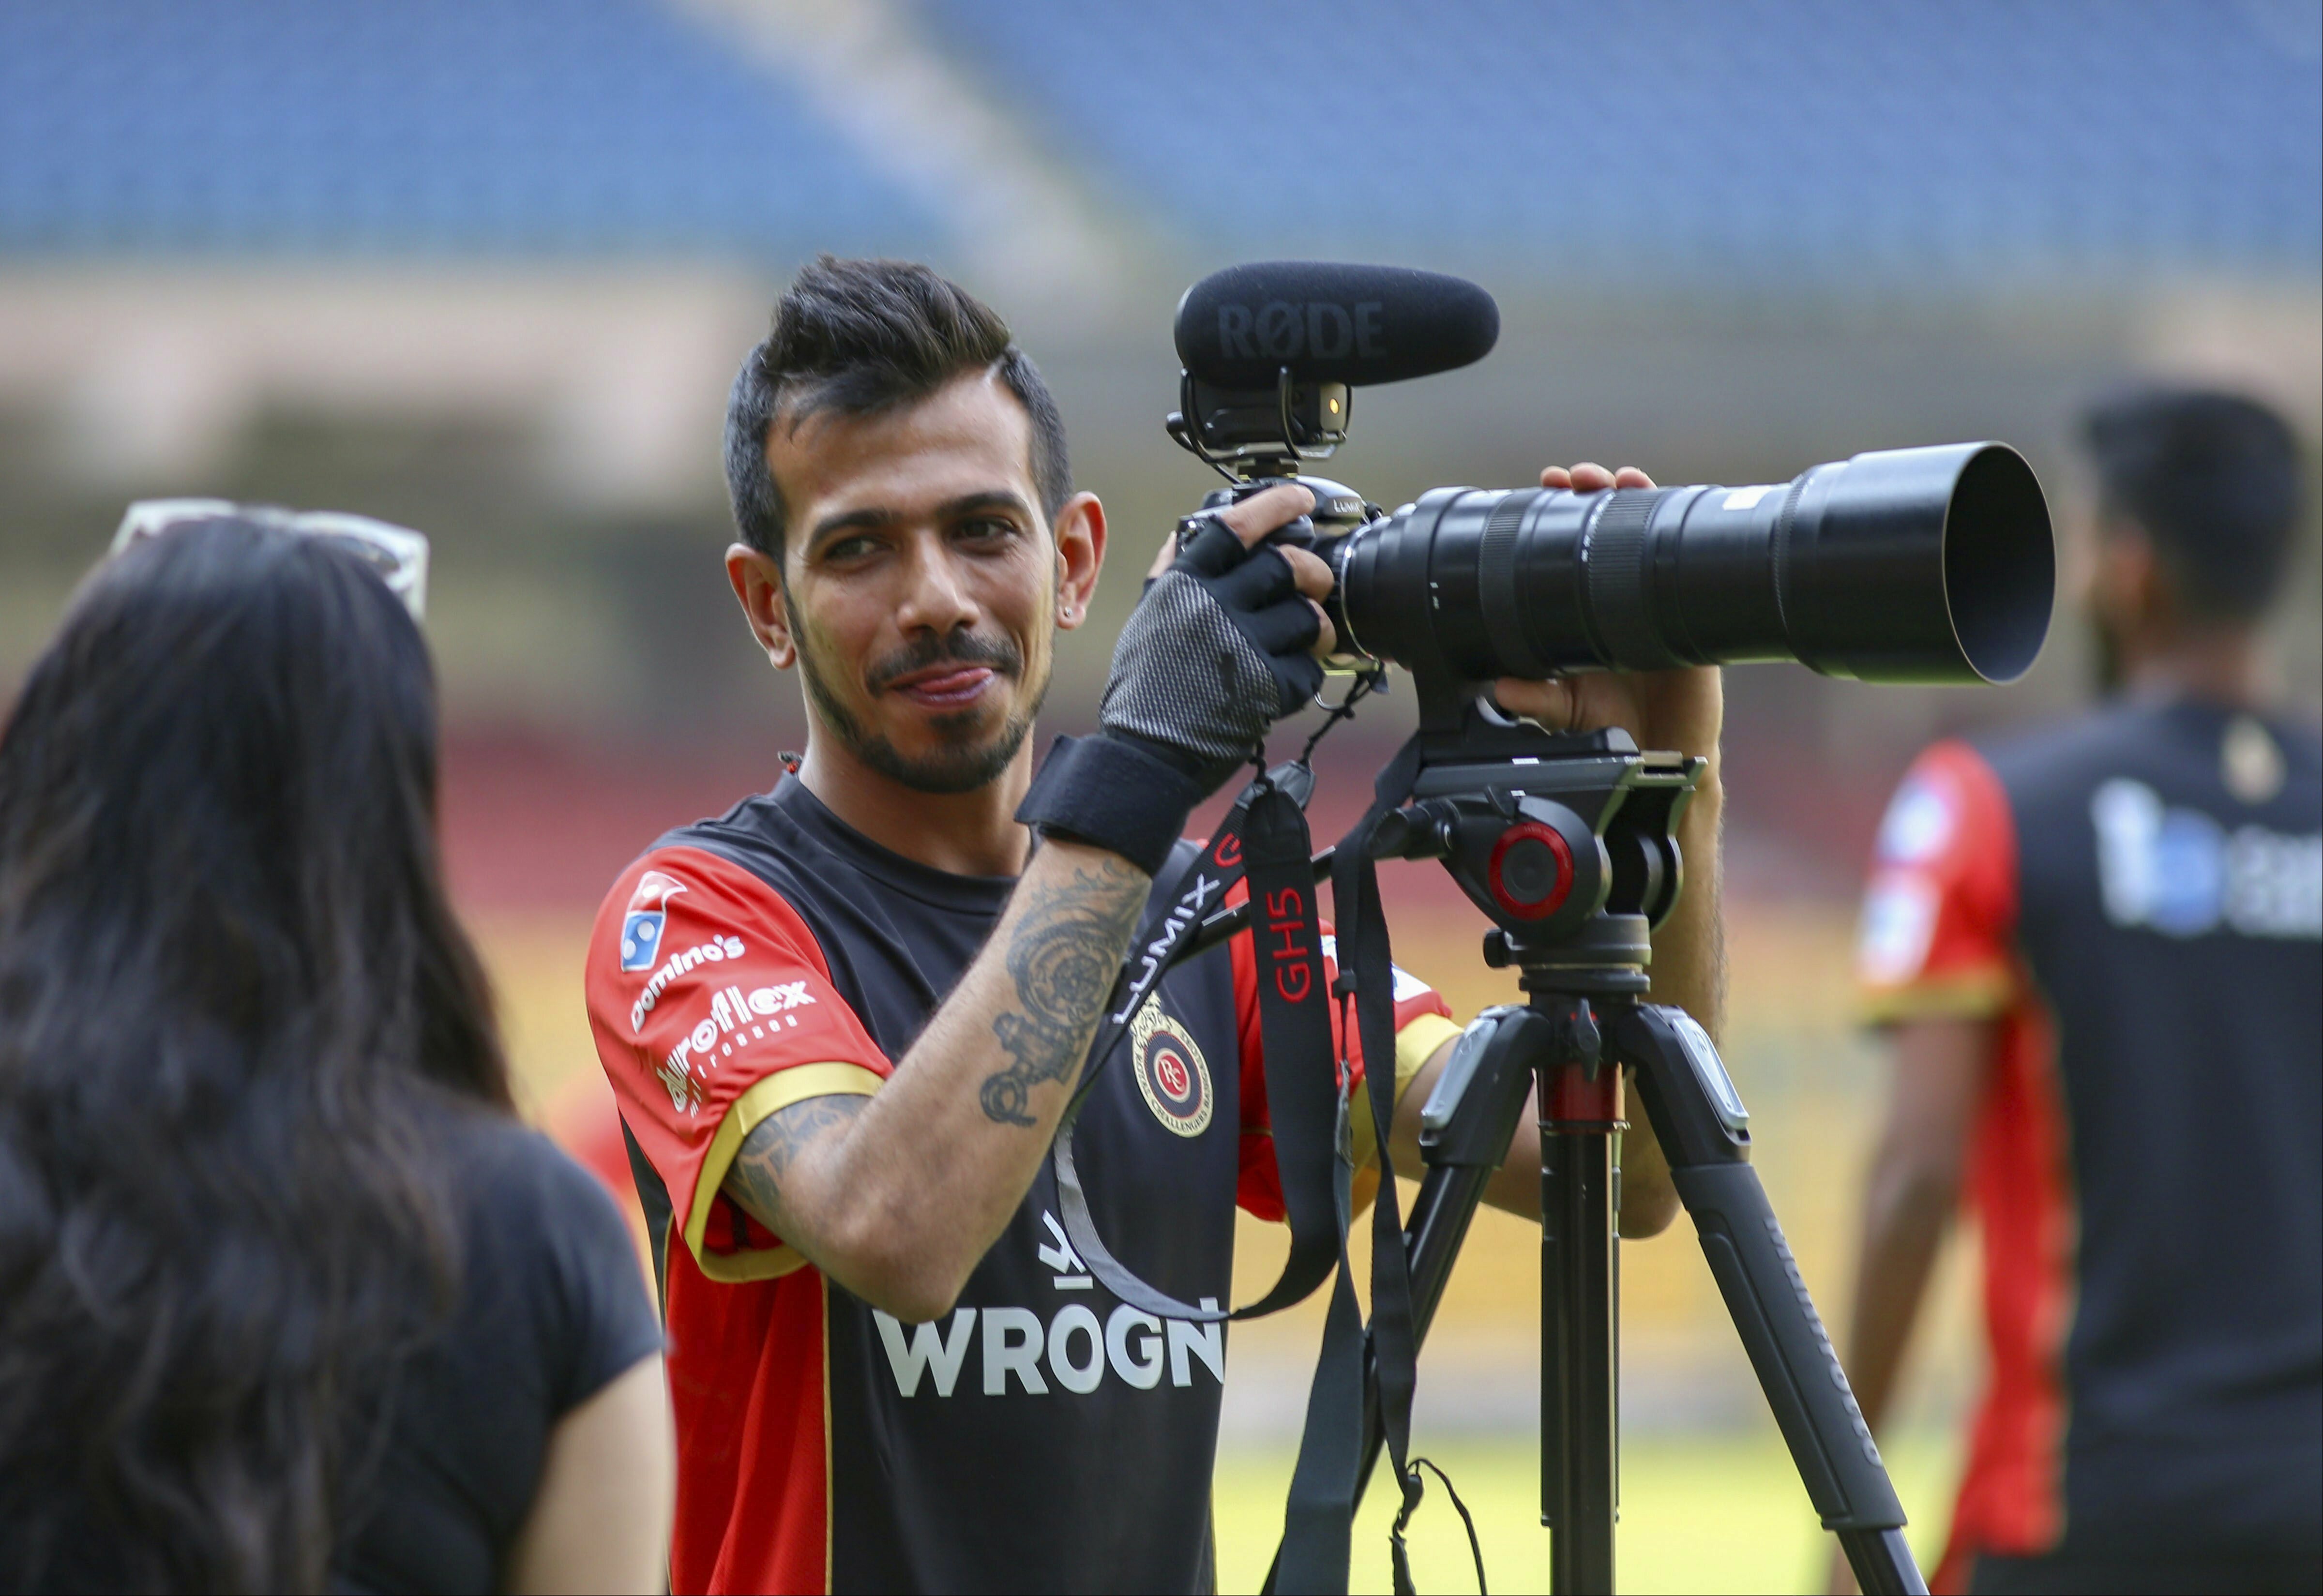 Royal Challengers Bangalore Yuzvendra Chahal operates a camera during a practice session ahead of IPL 2019 at Chinnaswamy Stadium in Bengaluru - PTI